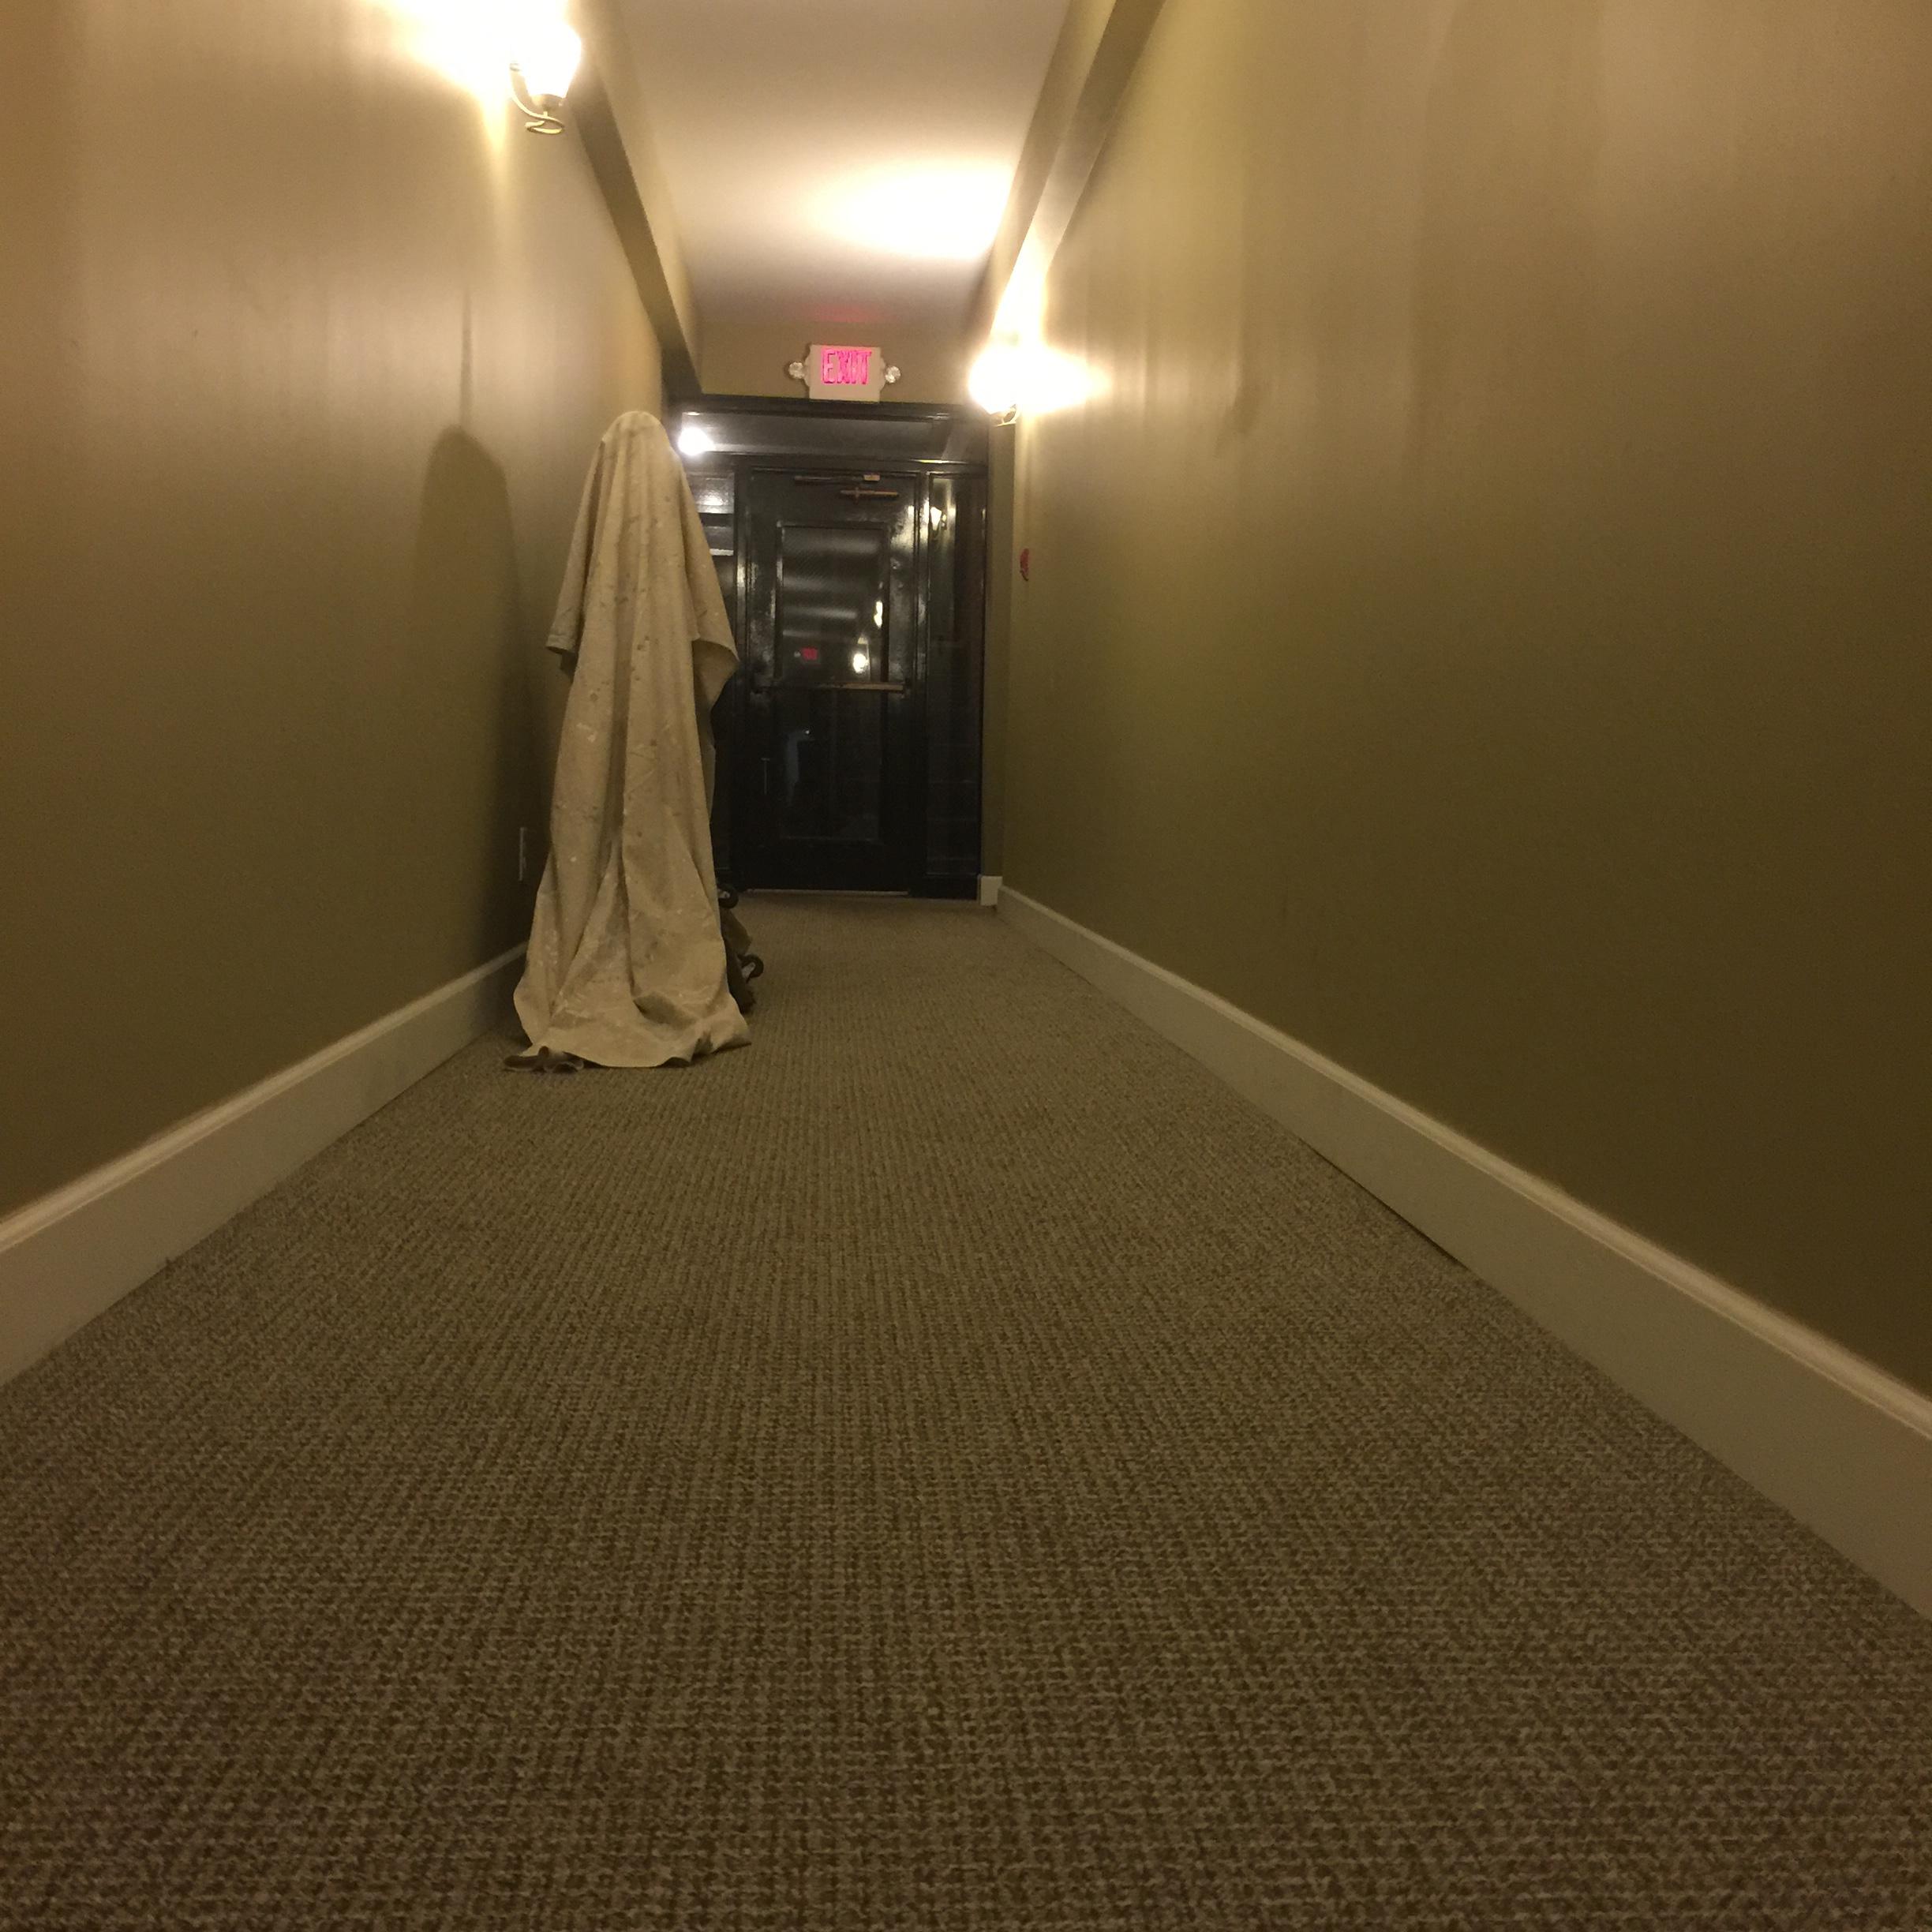 Guy Finds a Terrifying Sight in His Building at 3 am